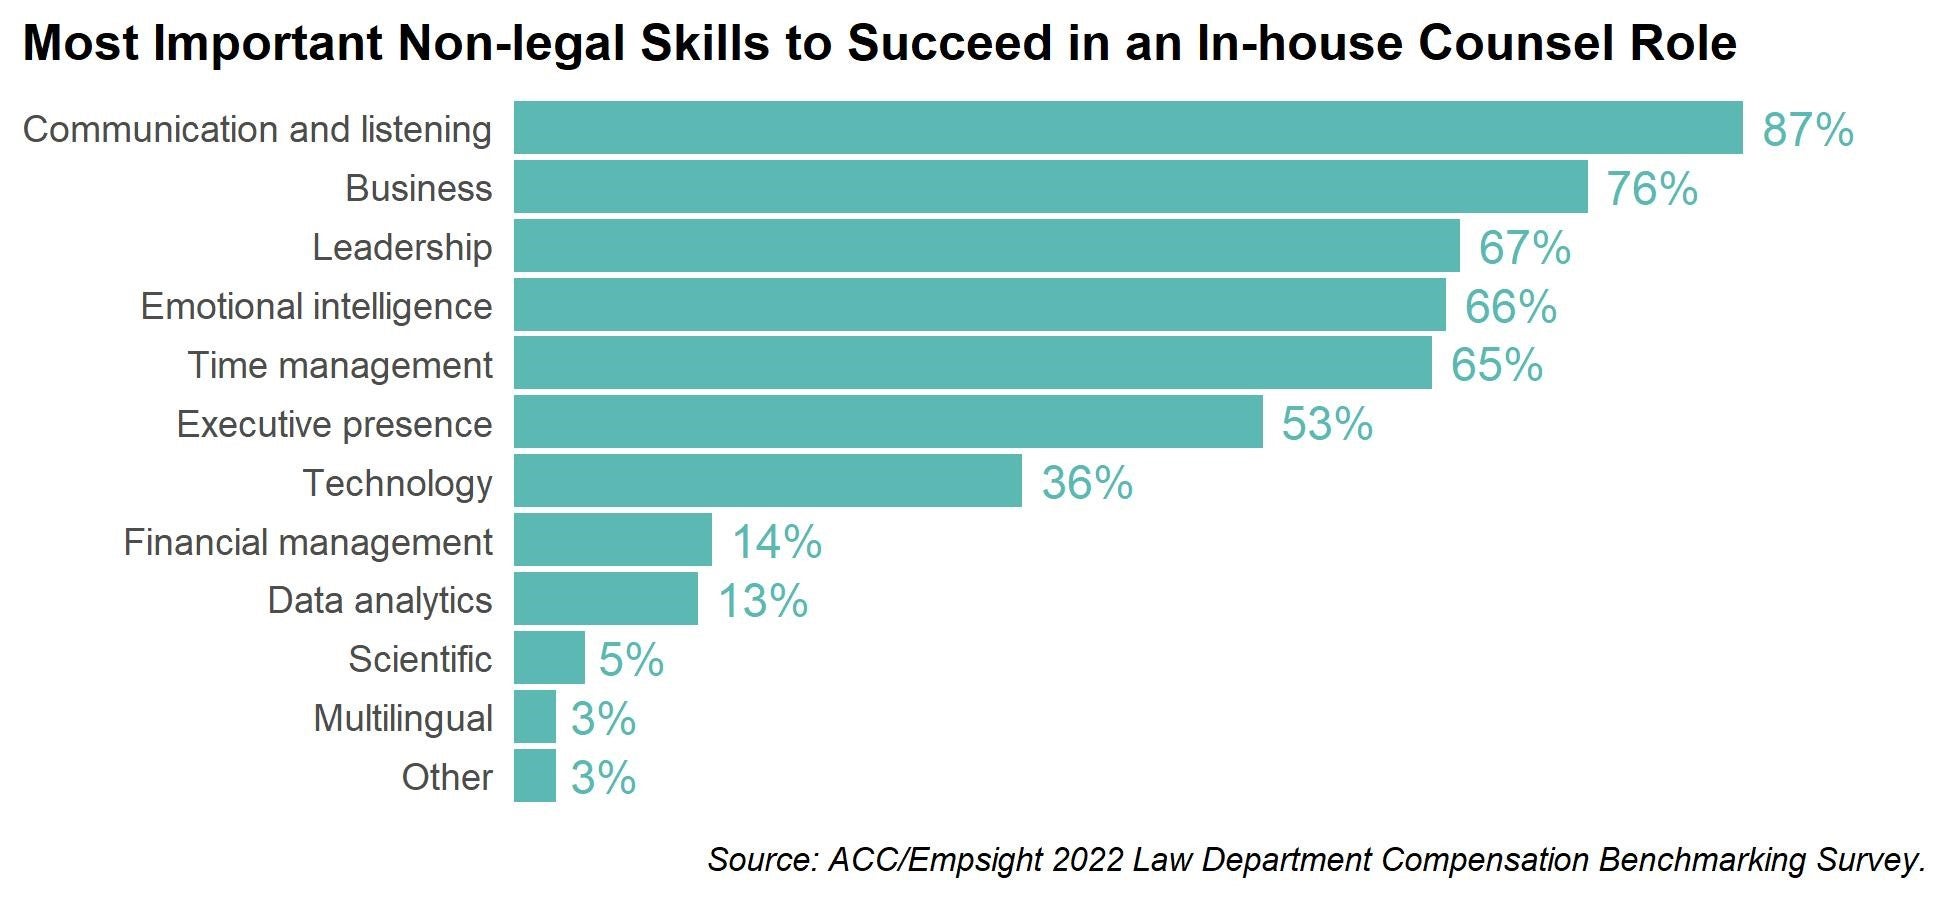 Most Important Non-legal Skills to Succeed in an In-house Counsel Role - chart